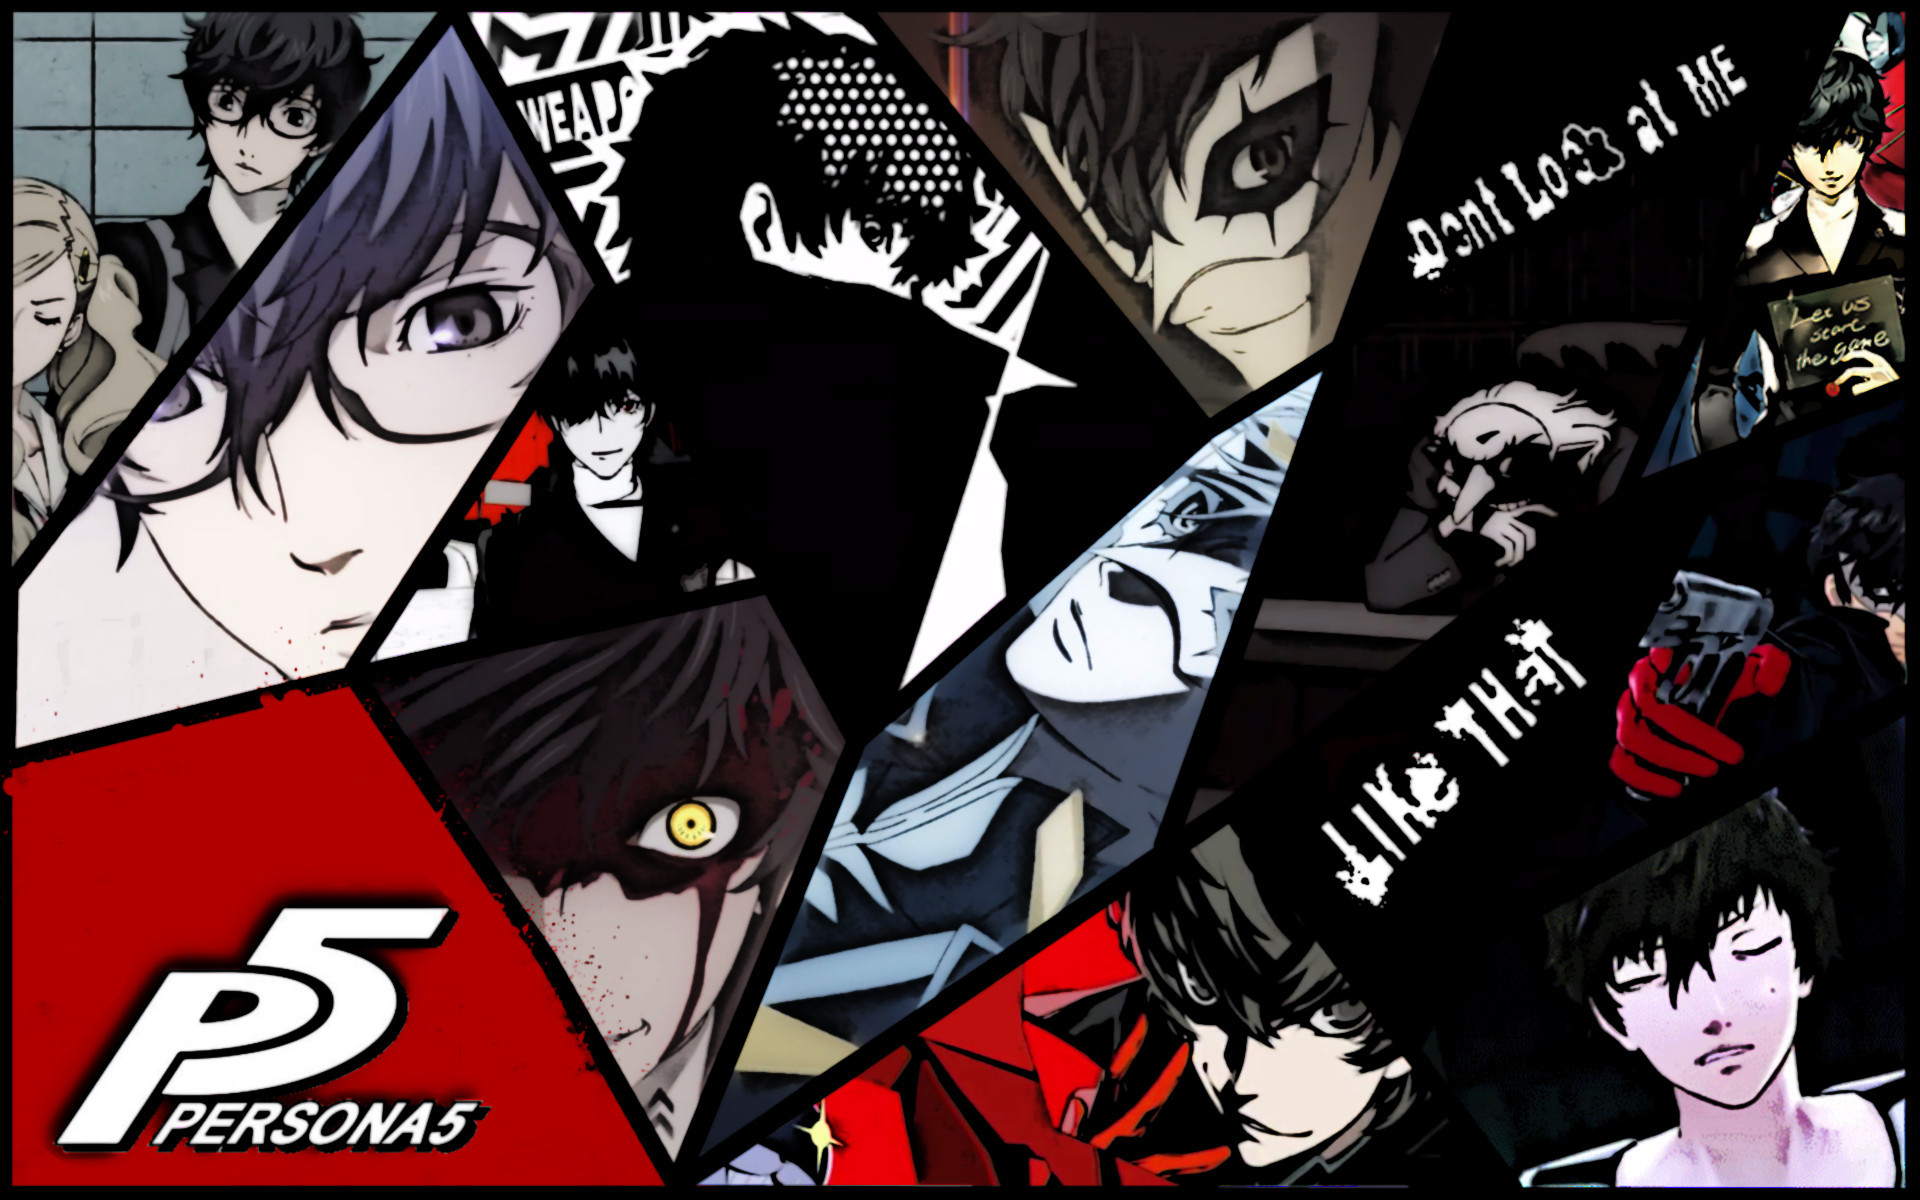 1920x1200 Persona 5 Wallpapers (34 Wallpapers)